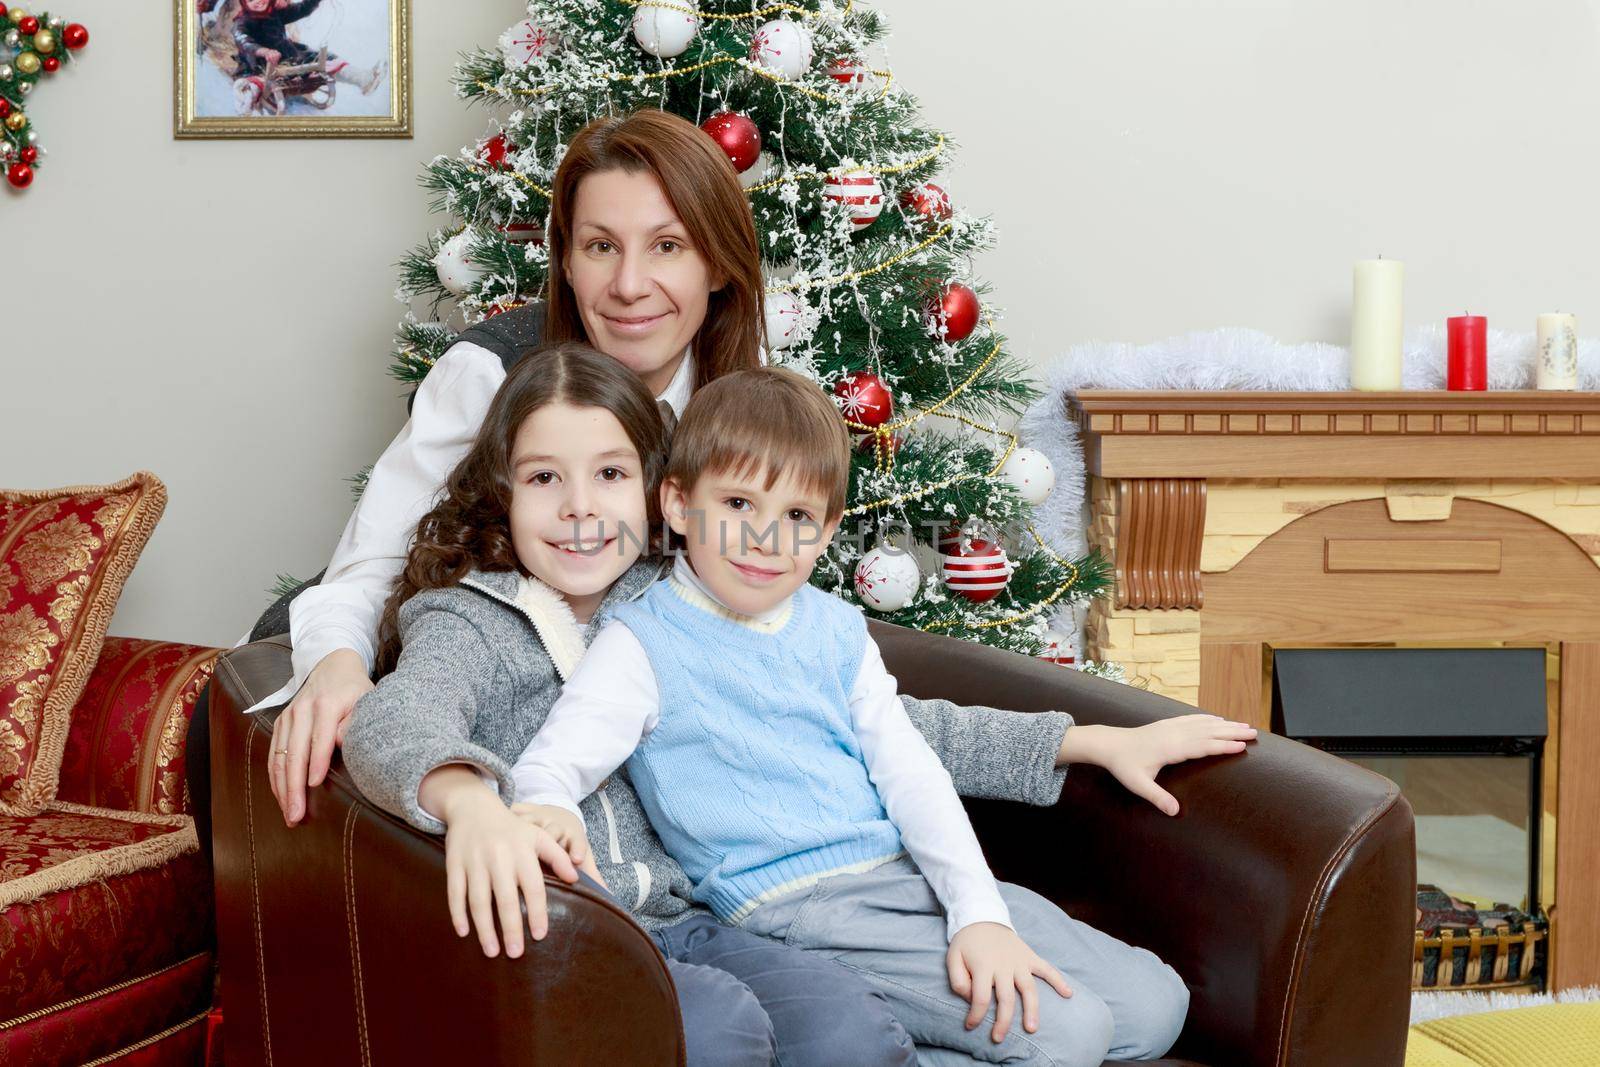 Happy mother hug her beloved children, daughter and son. On the couch by the Christmas tree.